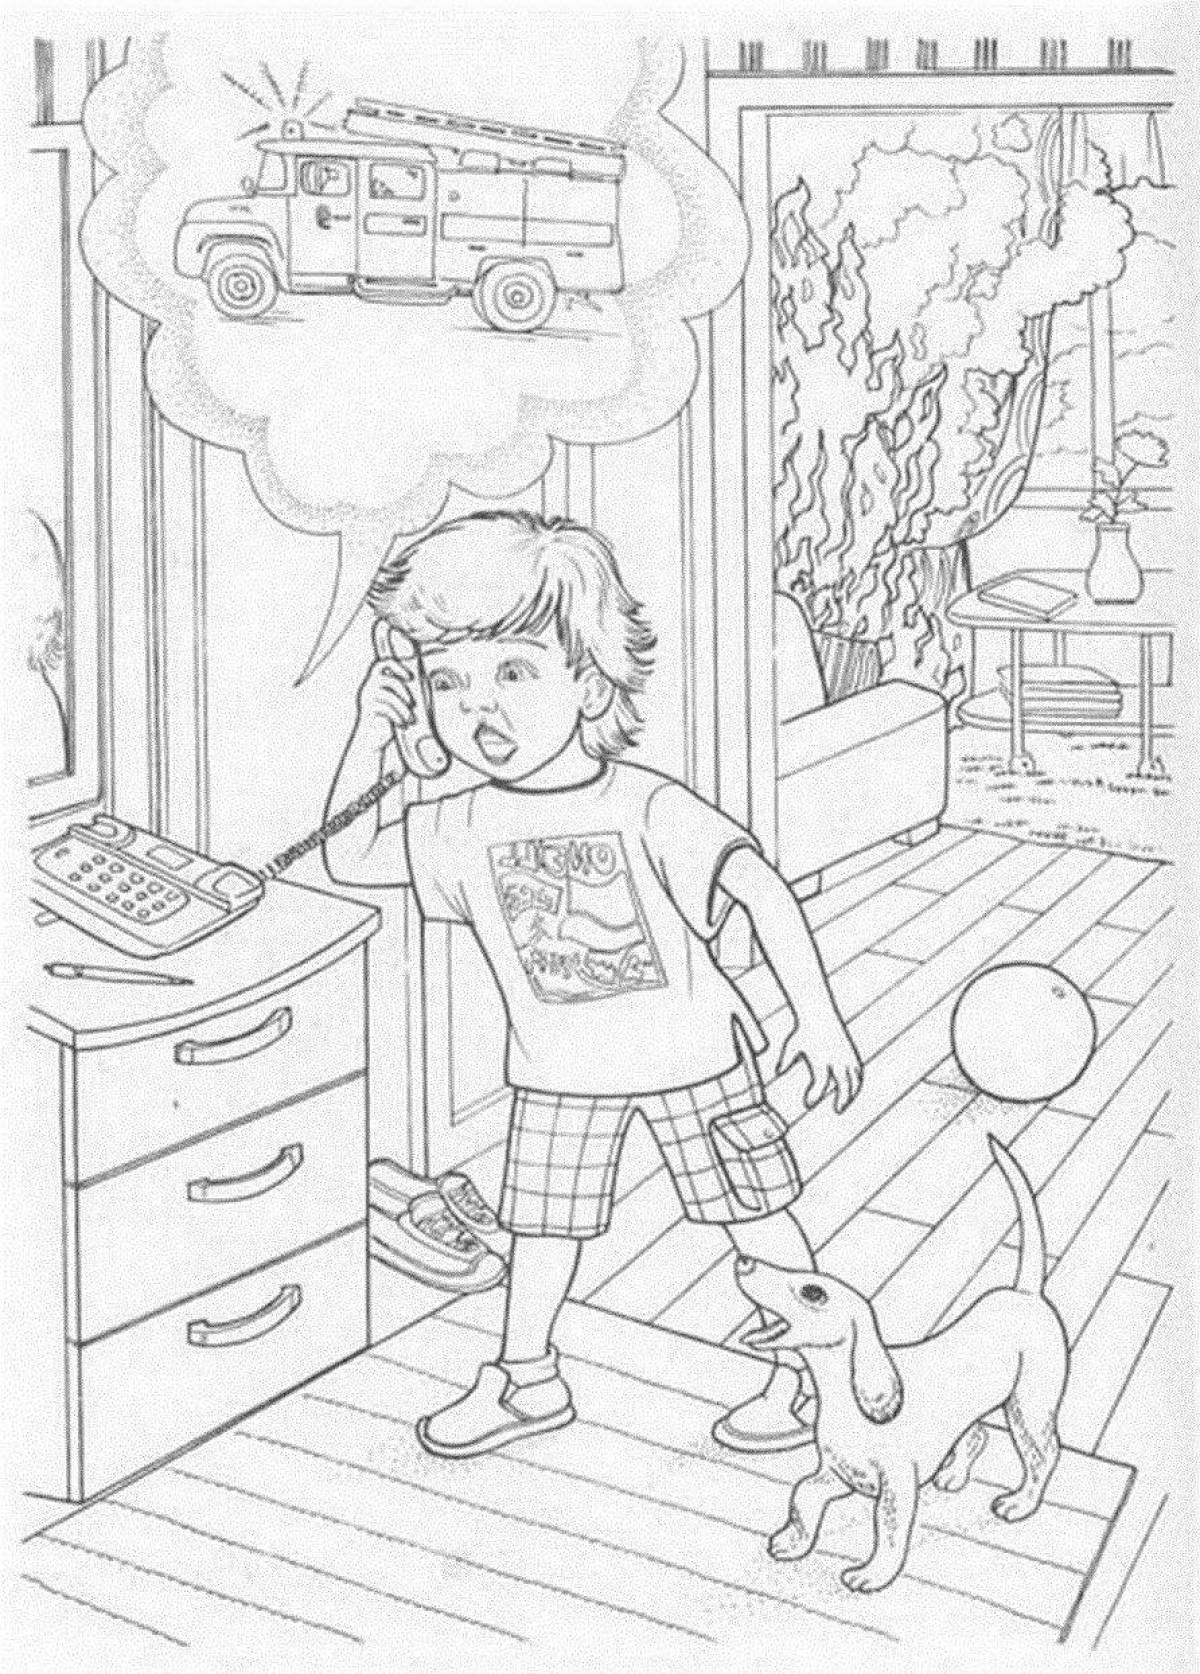 Creative fire safety coloring book